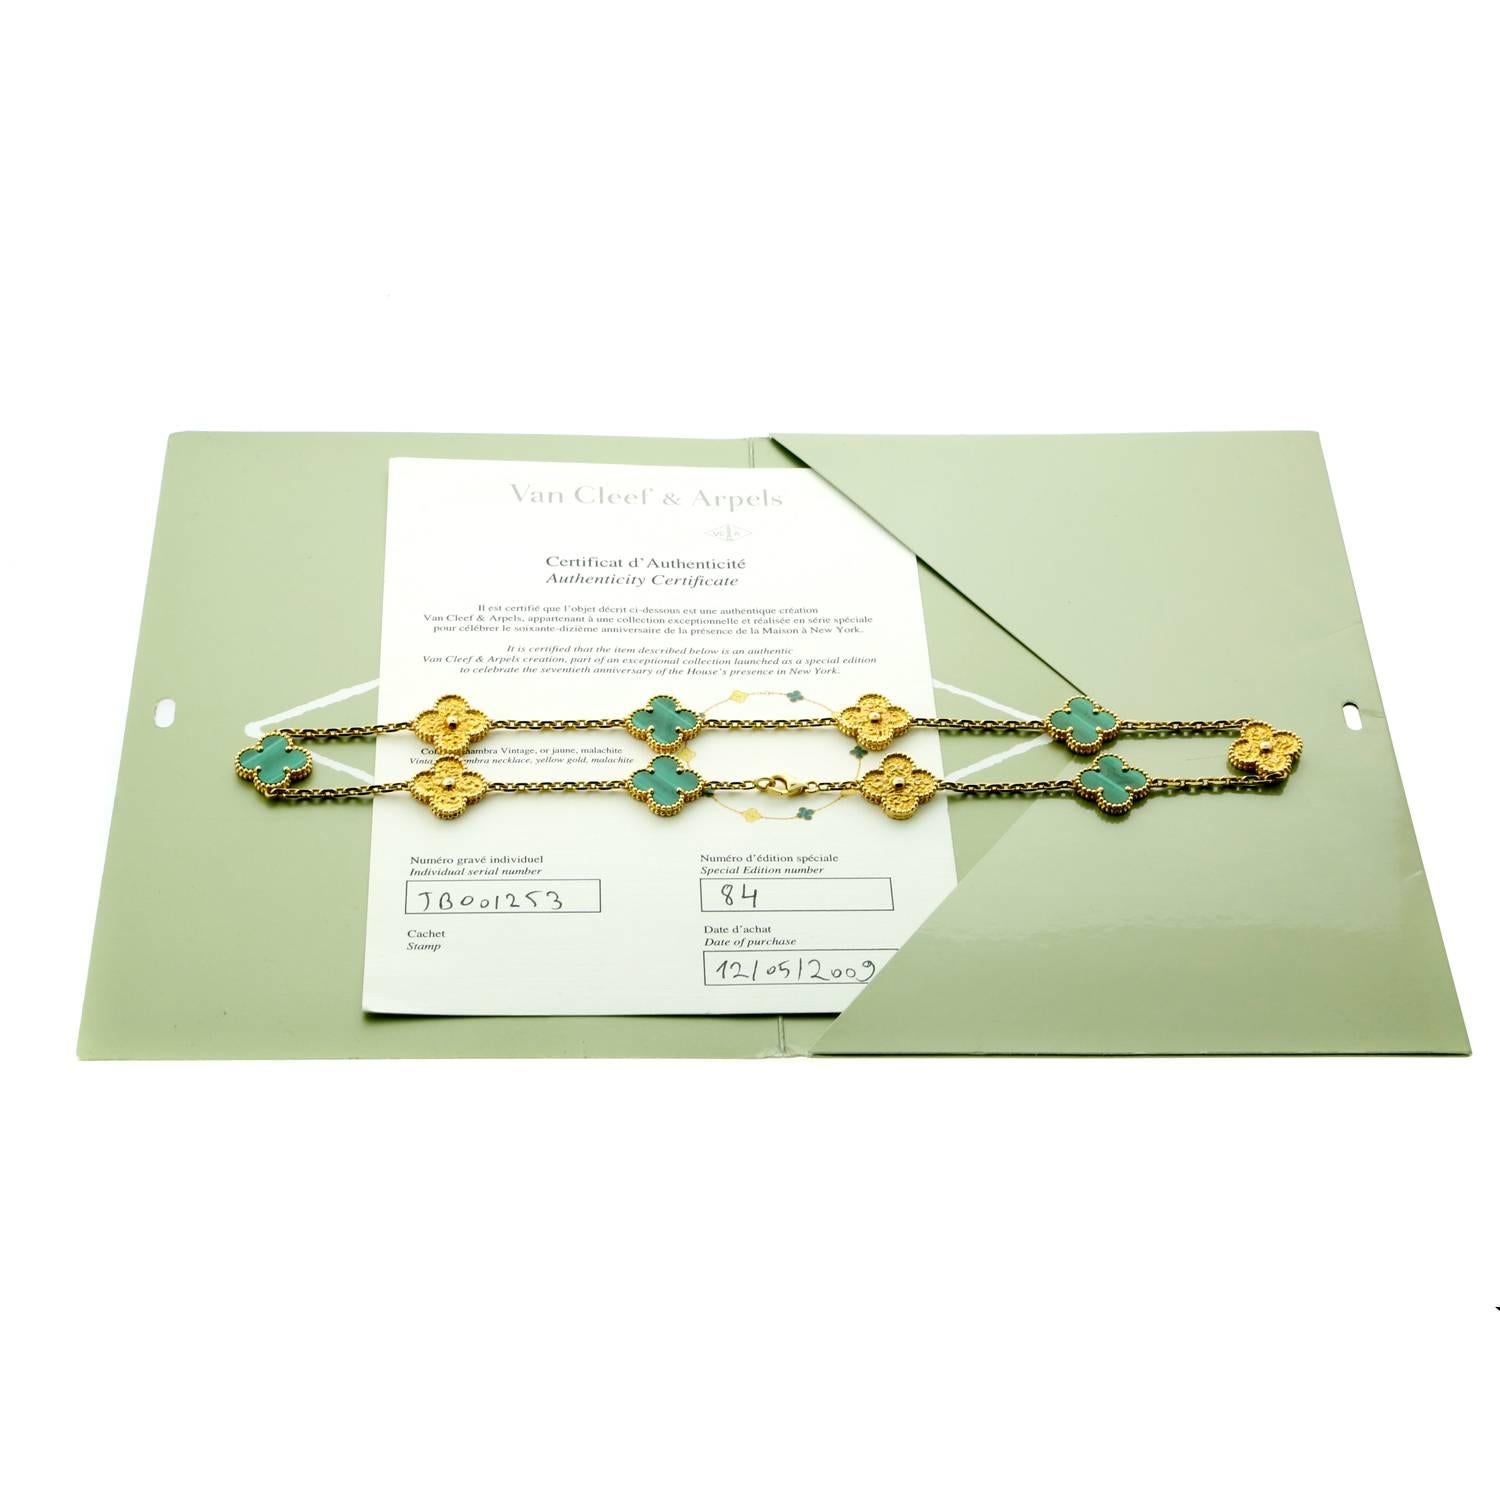 A special release by Van Cleef Arpels and limited to only 100 pcs this magnificent Malachite necklace is crafted in 18k yellow gold and perfect for any VCA collector. Accompanied by Van Cleef Arpels documents.

Inventory ID: 0000376